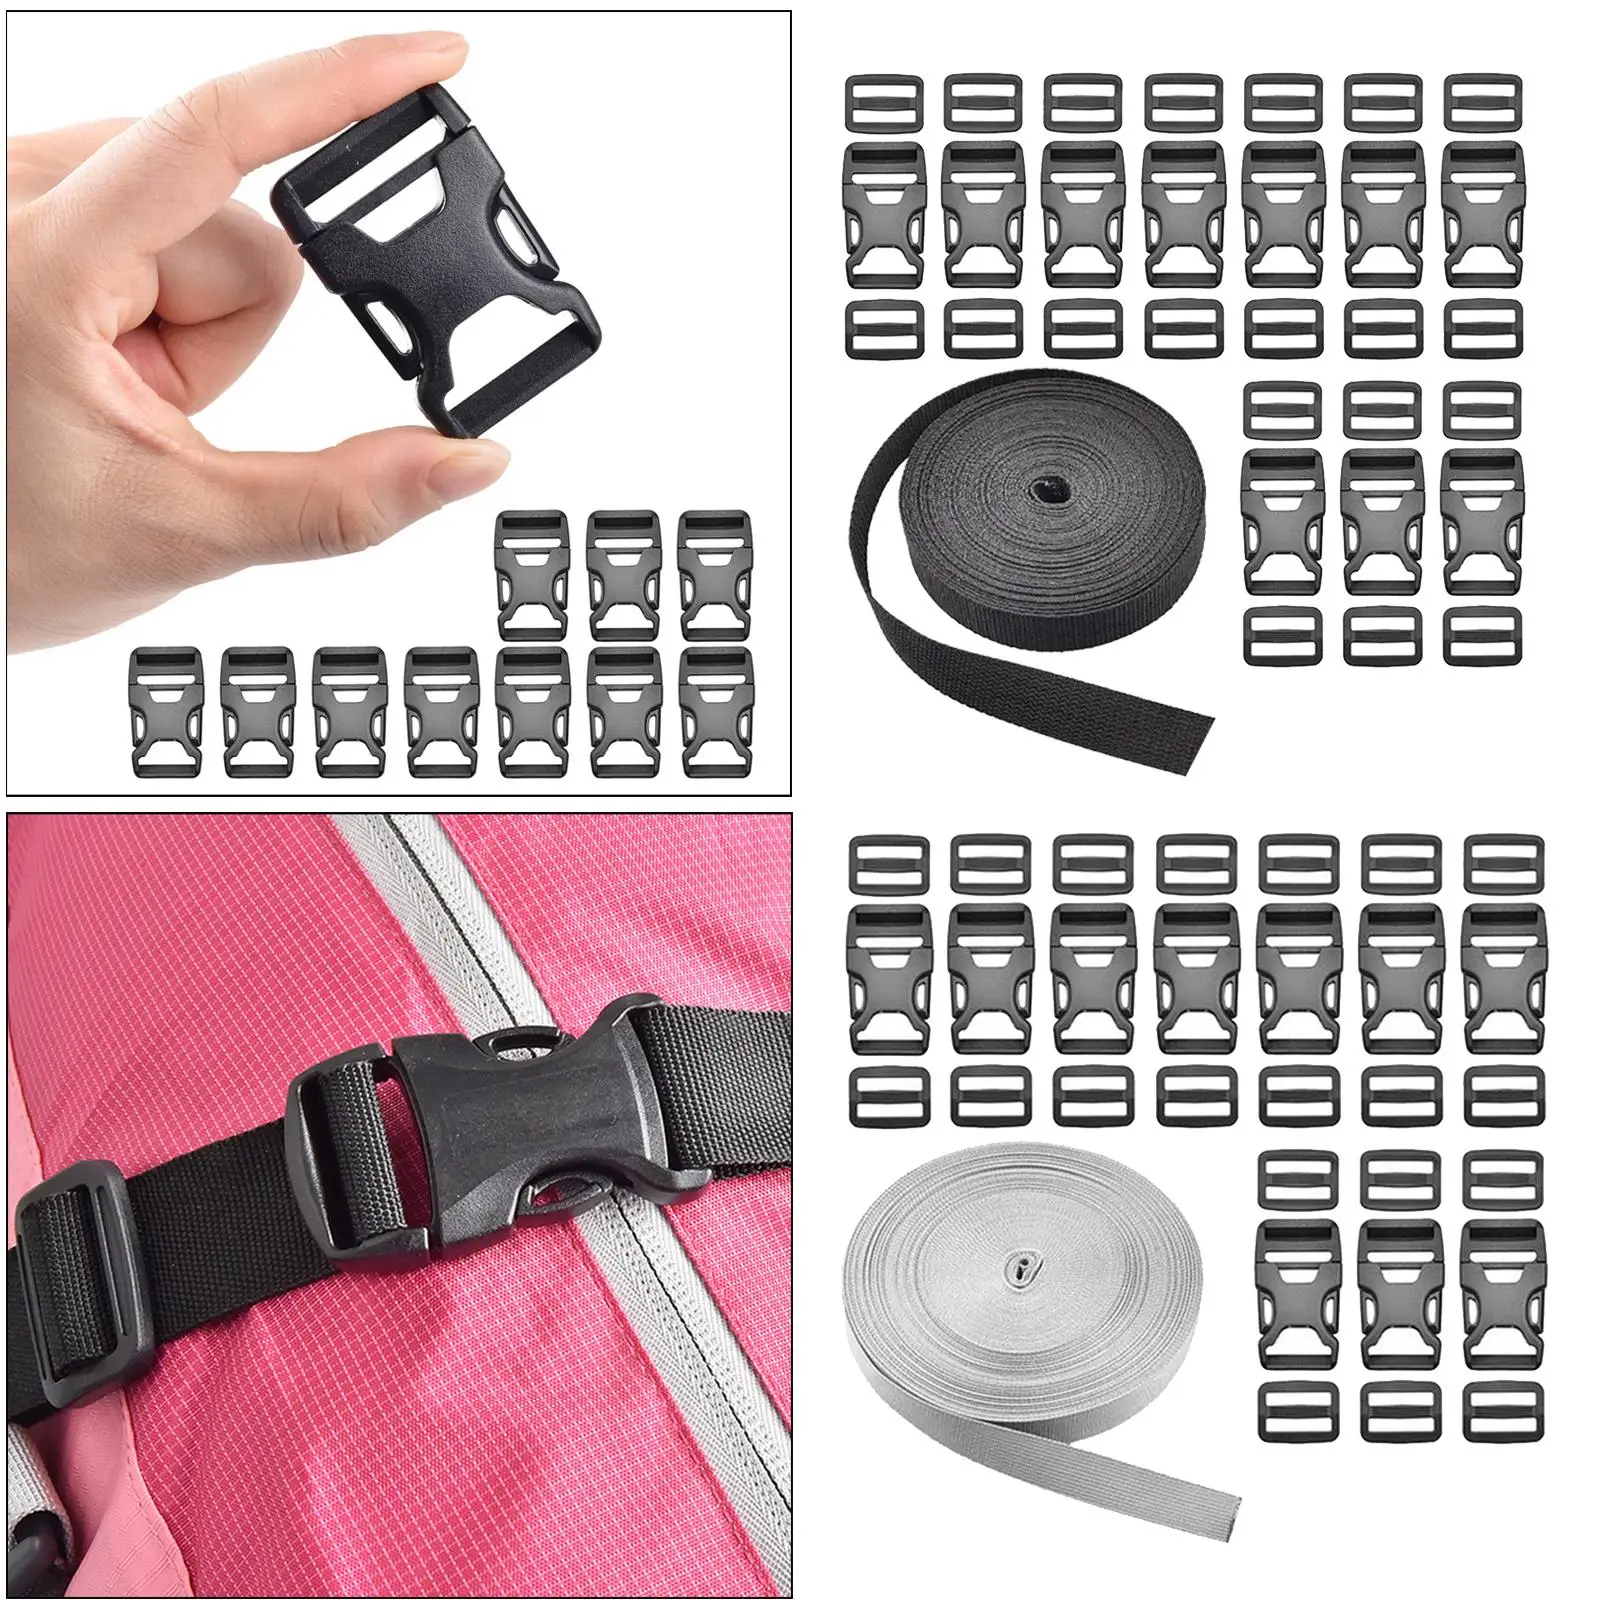 Utility Straps/ Lashing Strap with Buckle Great for Backpacking, air mattresses, Sleeping Bags, Camping Accessories